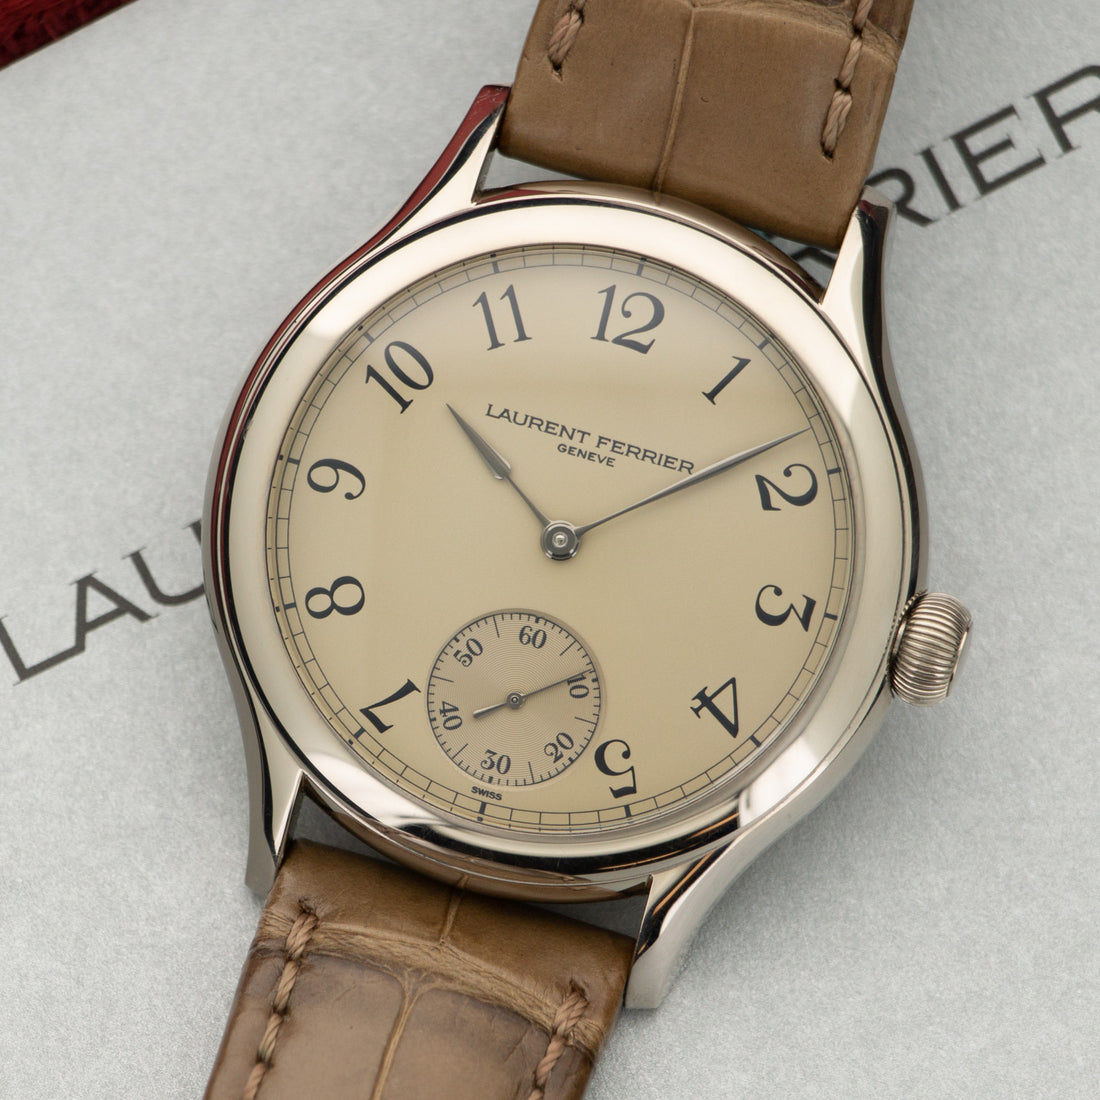 Laurent Ferrier White Gold Galet Micro-Rotor Watch Ref. FBN229.01